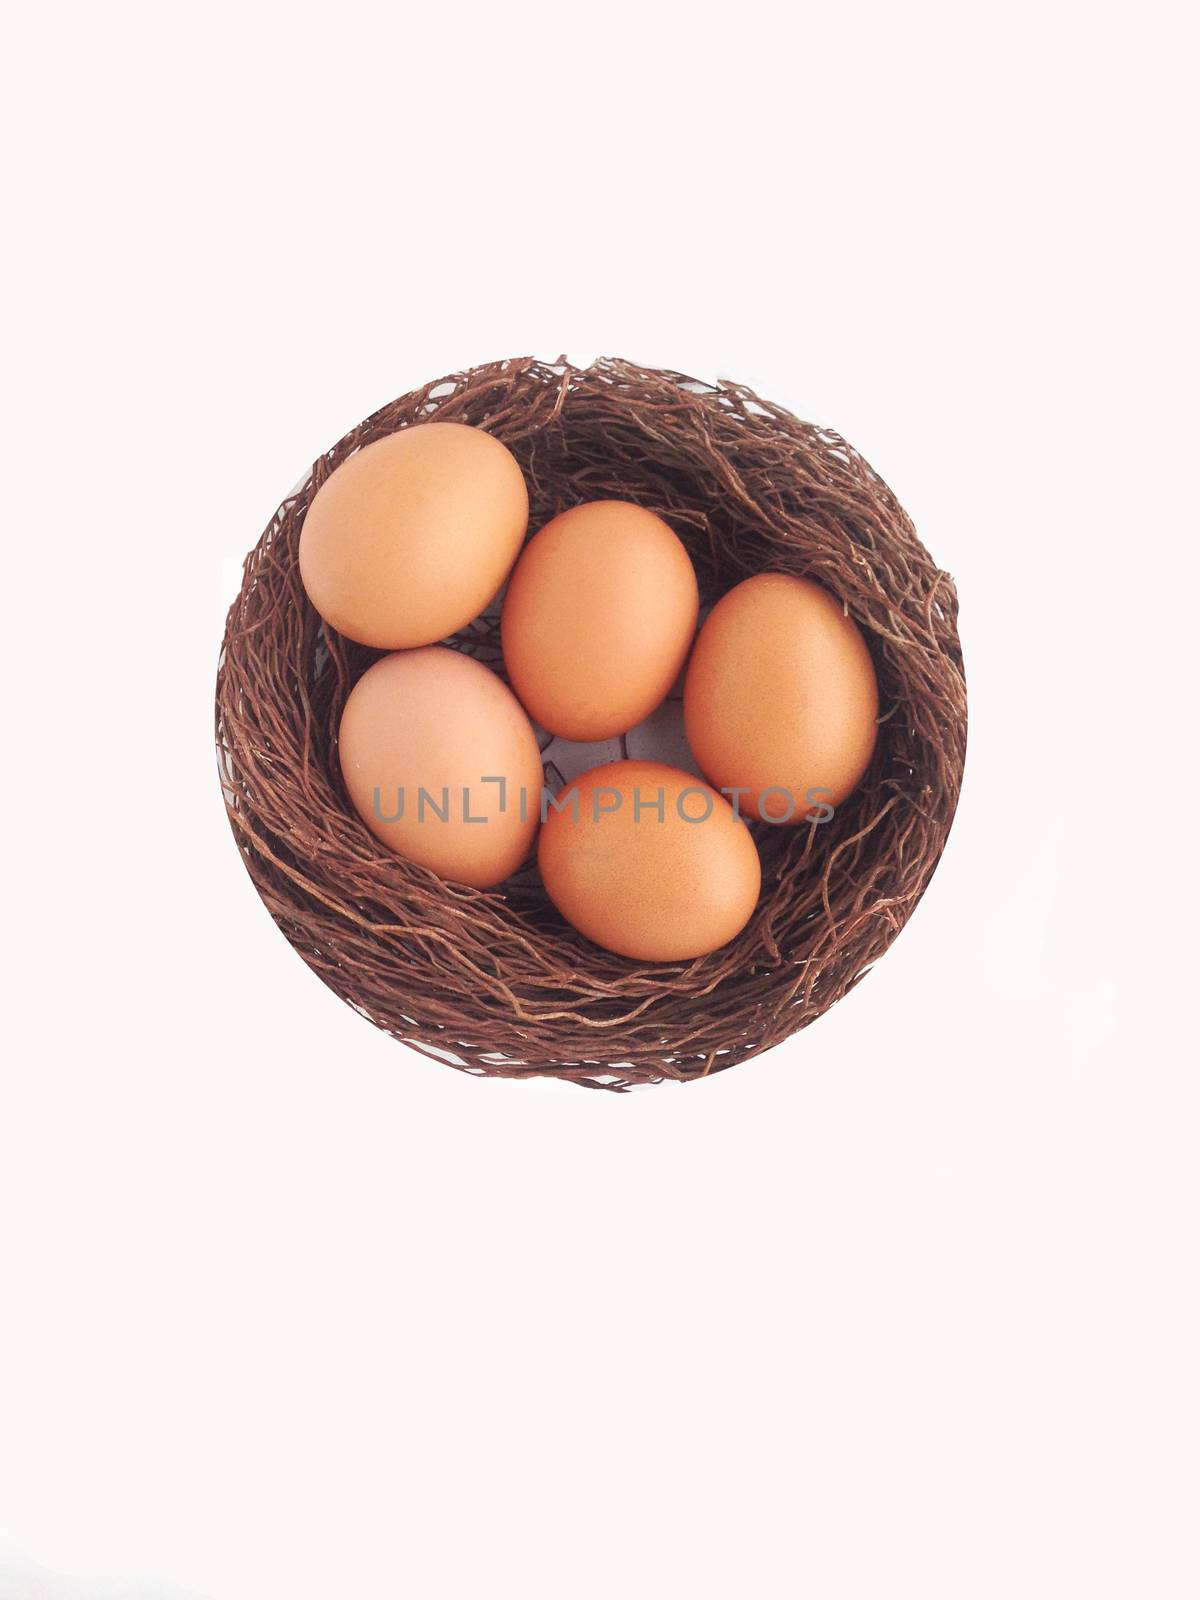 chicken egg on nest made from banyan tree air root with white background